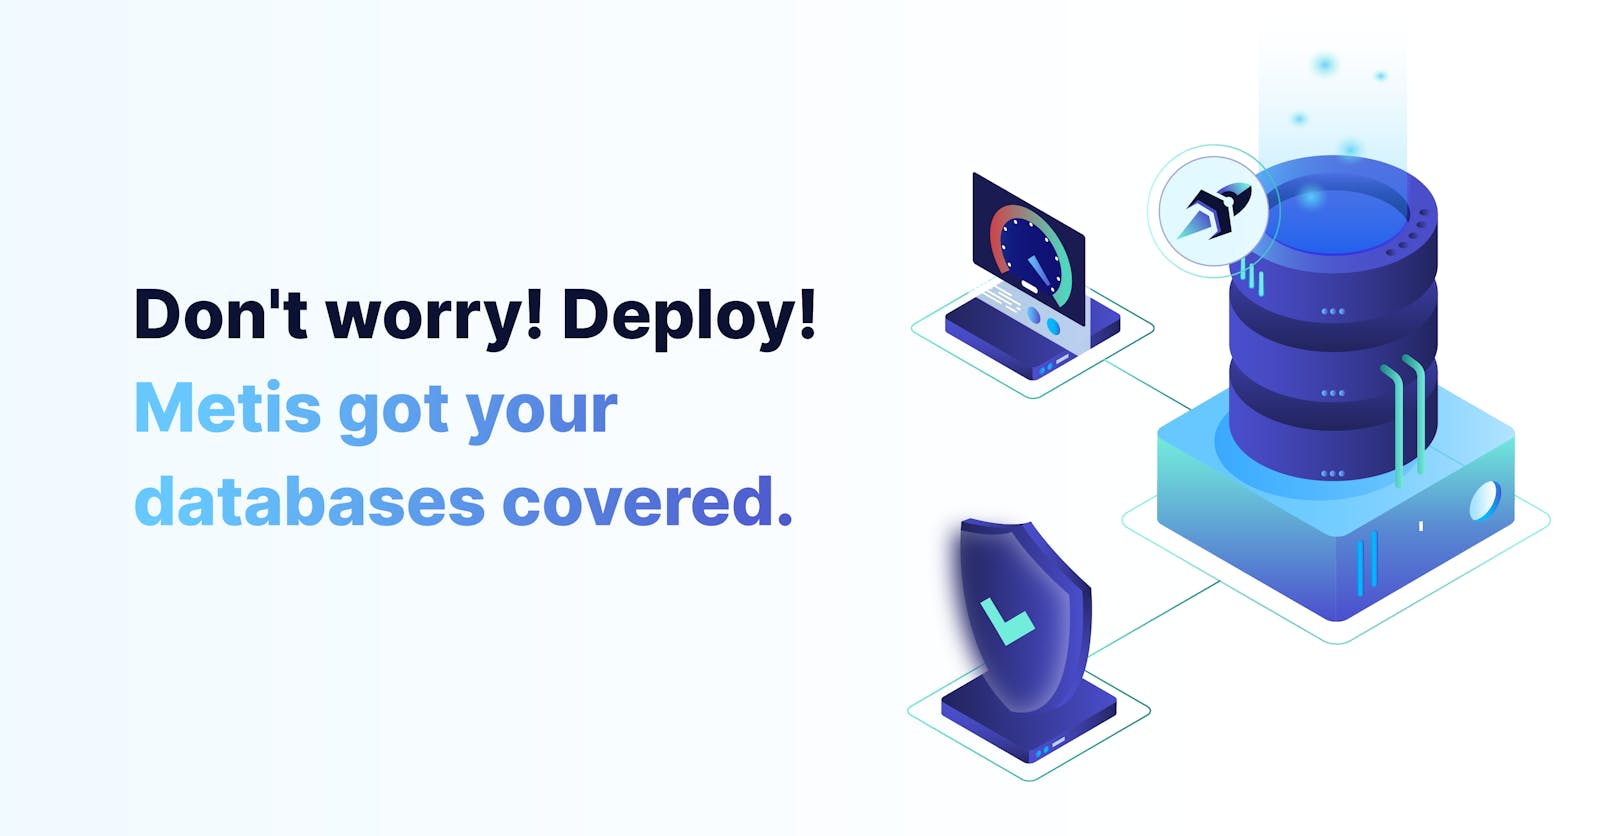 Don't worry! Deploy! Metis has your database covered.